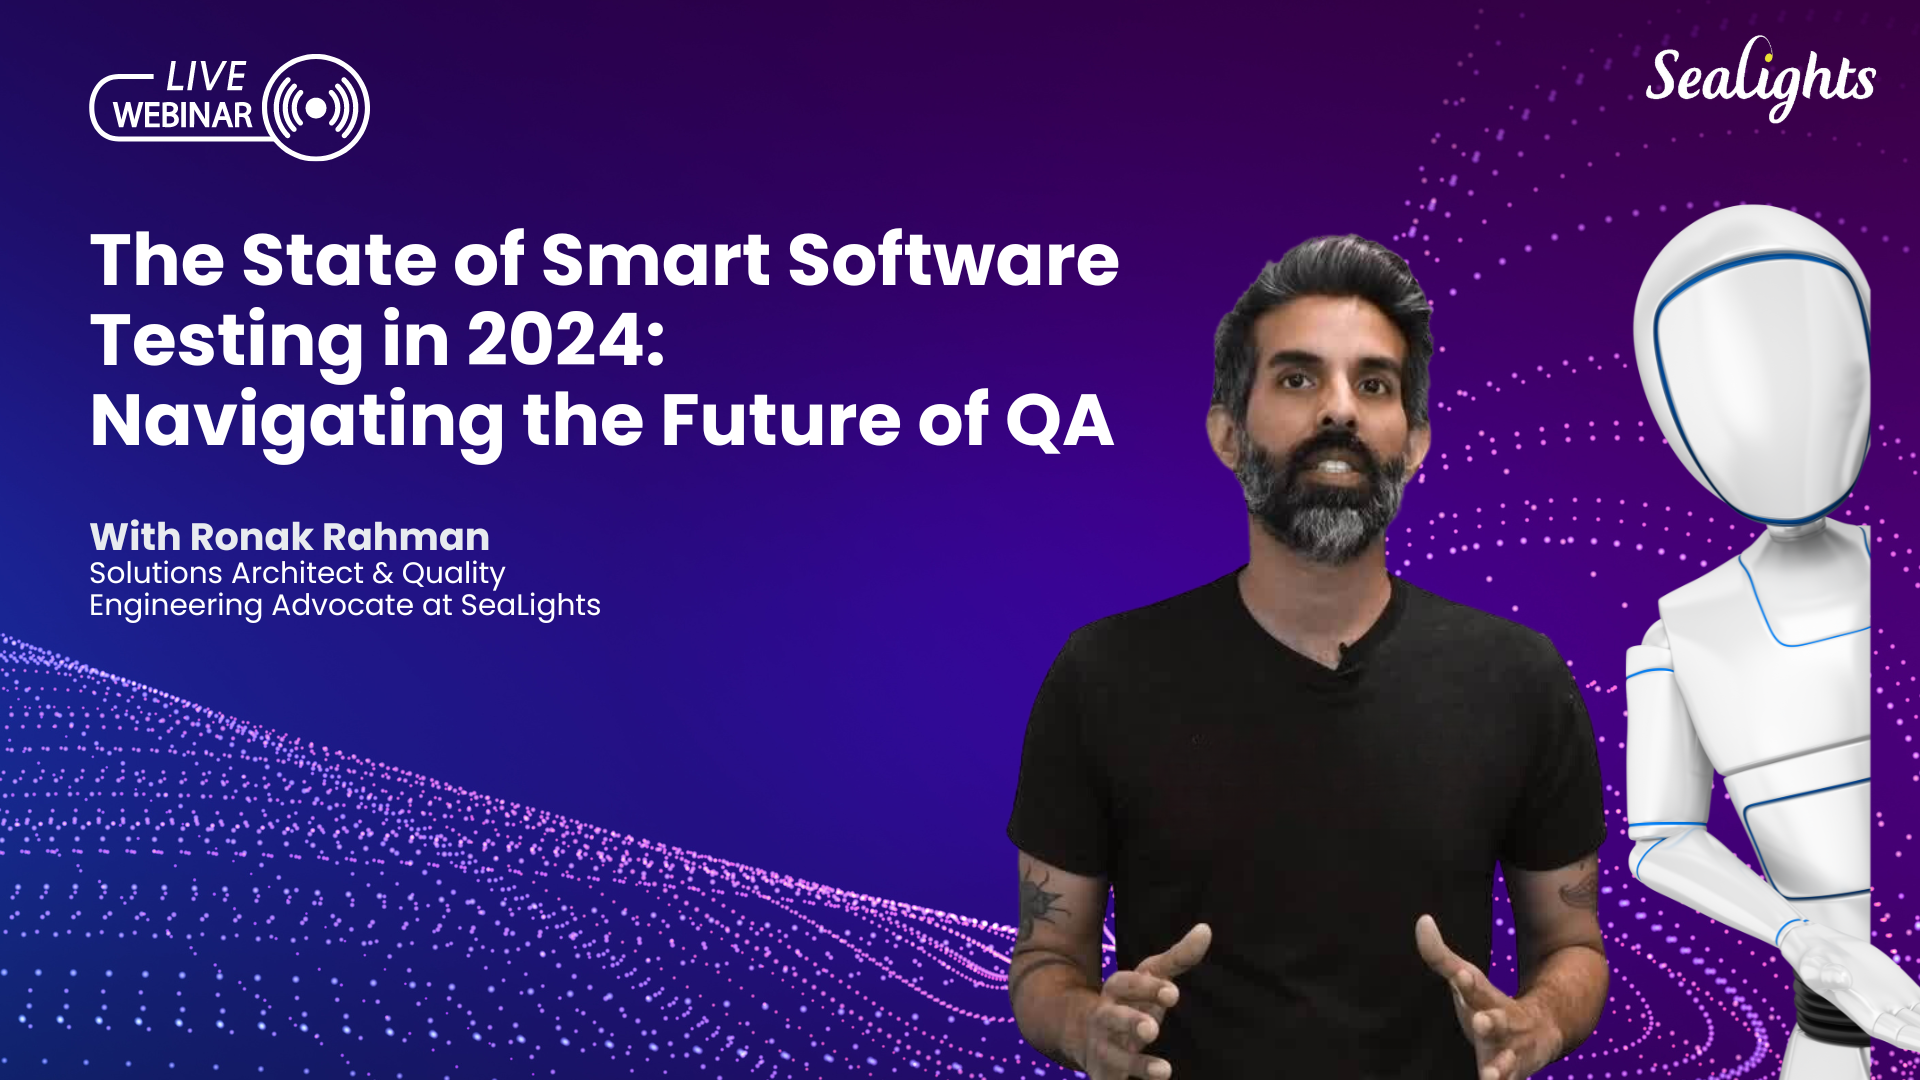 The State of Smart Software Testing in 2024: Navigating the Future of QA